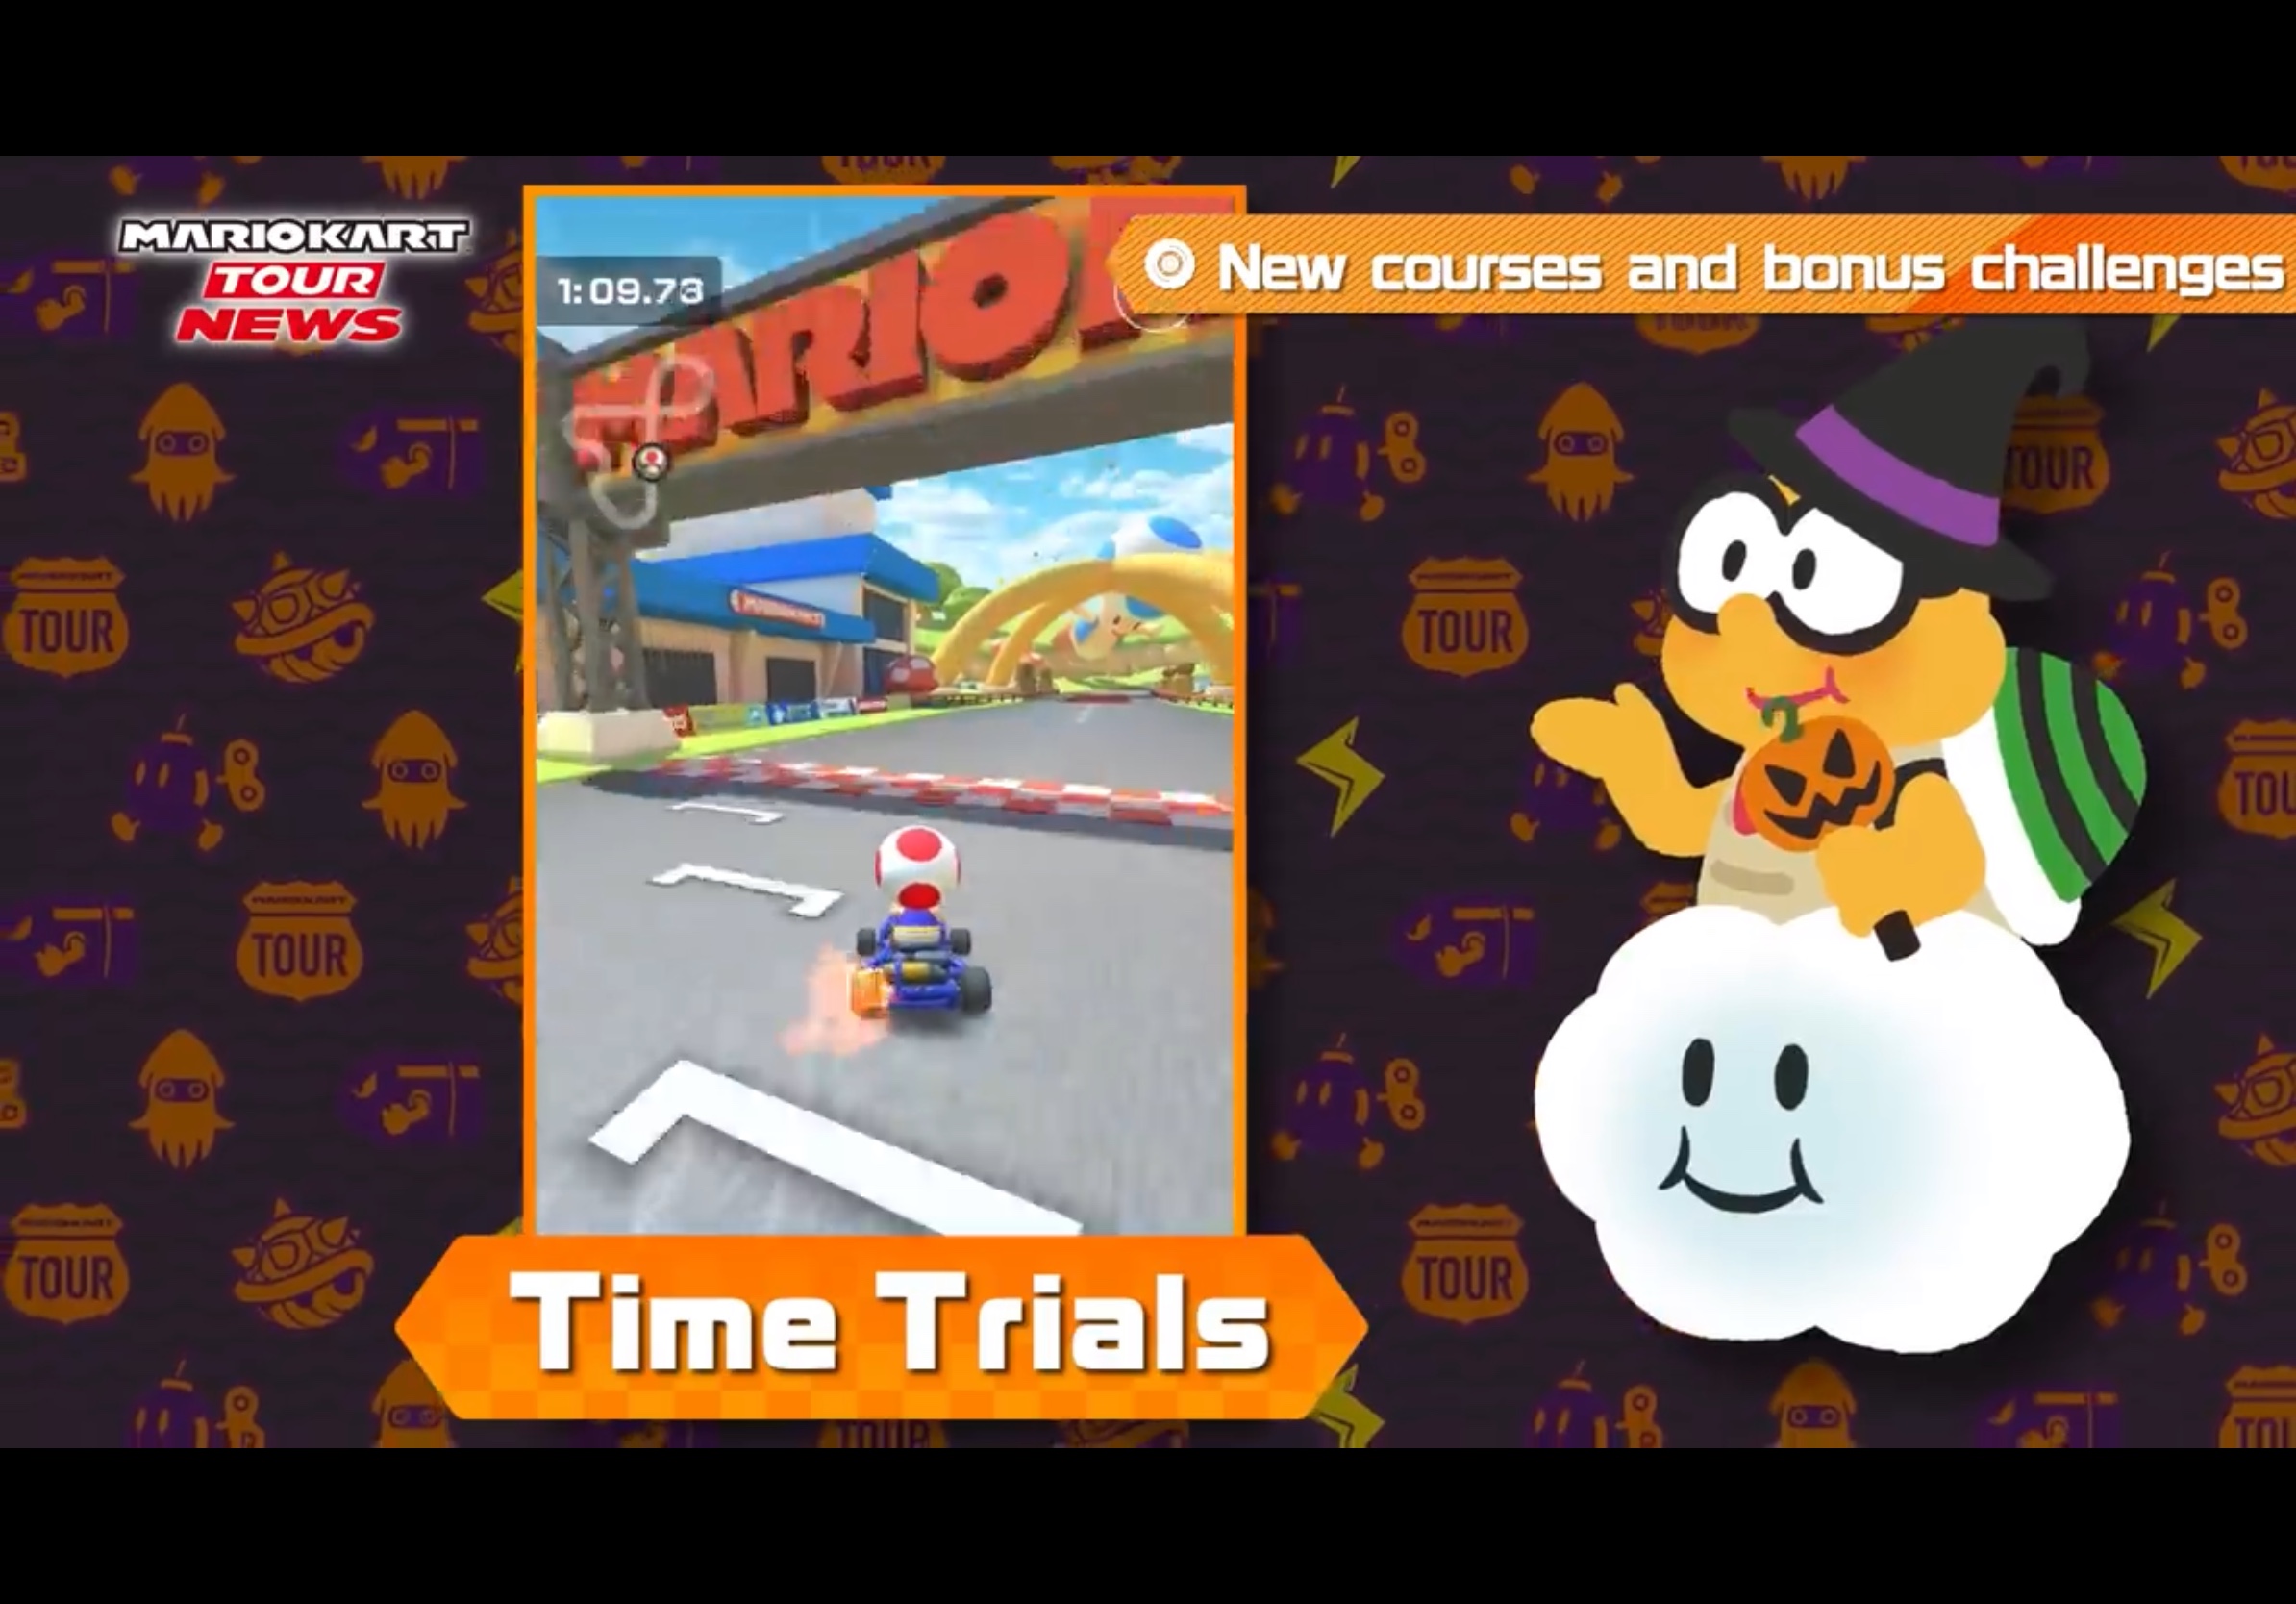 Mario Kart Tour on X: The 1st Anniversary Tour is wrapping up in # MarioKartTour. Starting Oct. 20, 11 PM PT, let's race in the Halloween Tour!  Fall is in full effect with